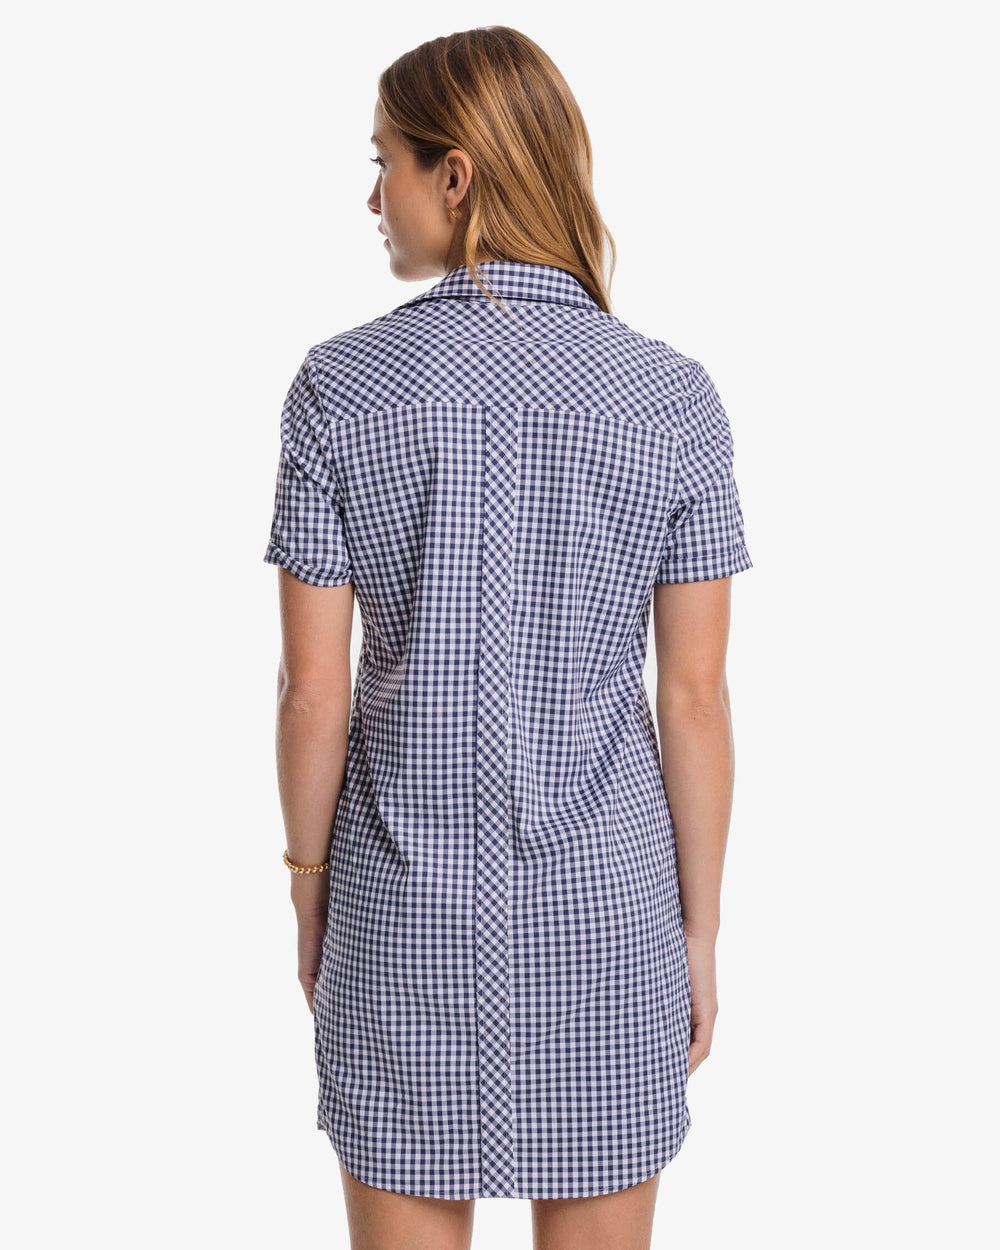 The back view of the Southern Tide Kamryn brrr°® Intercoastal Gingham Dress by Southern Tide - Nautical Navy